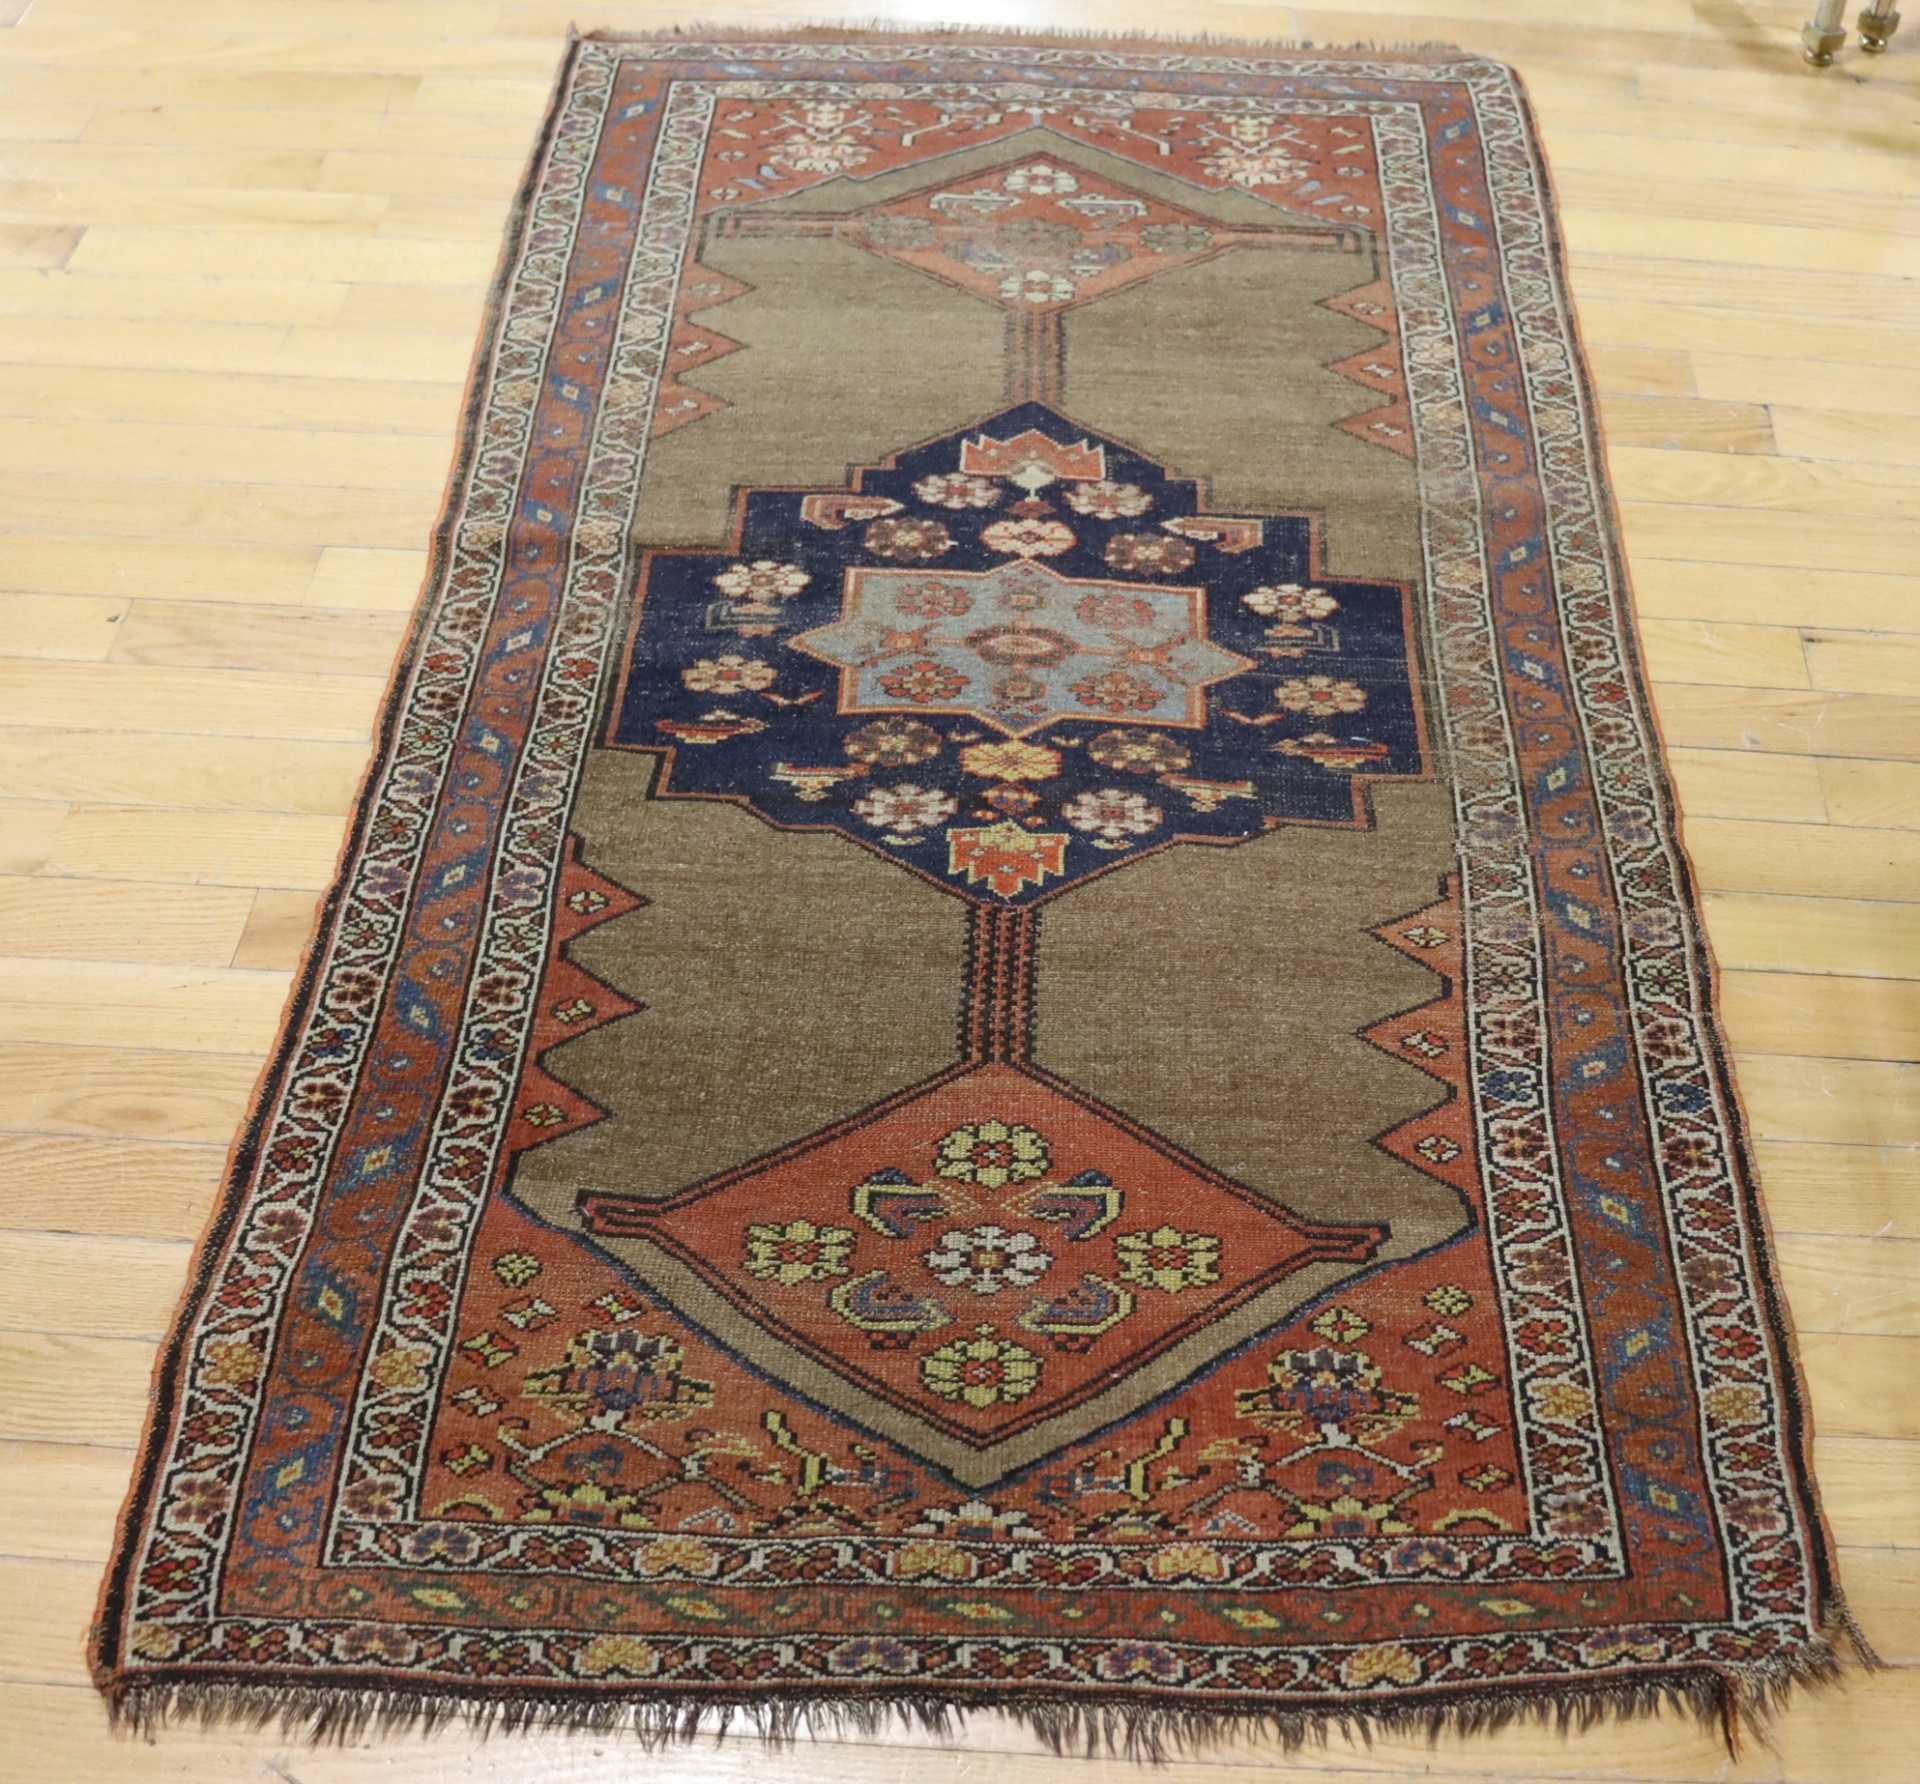 ANTIQUE AND FINELY HAND WOVEN KAZAK